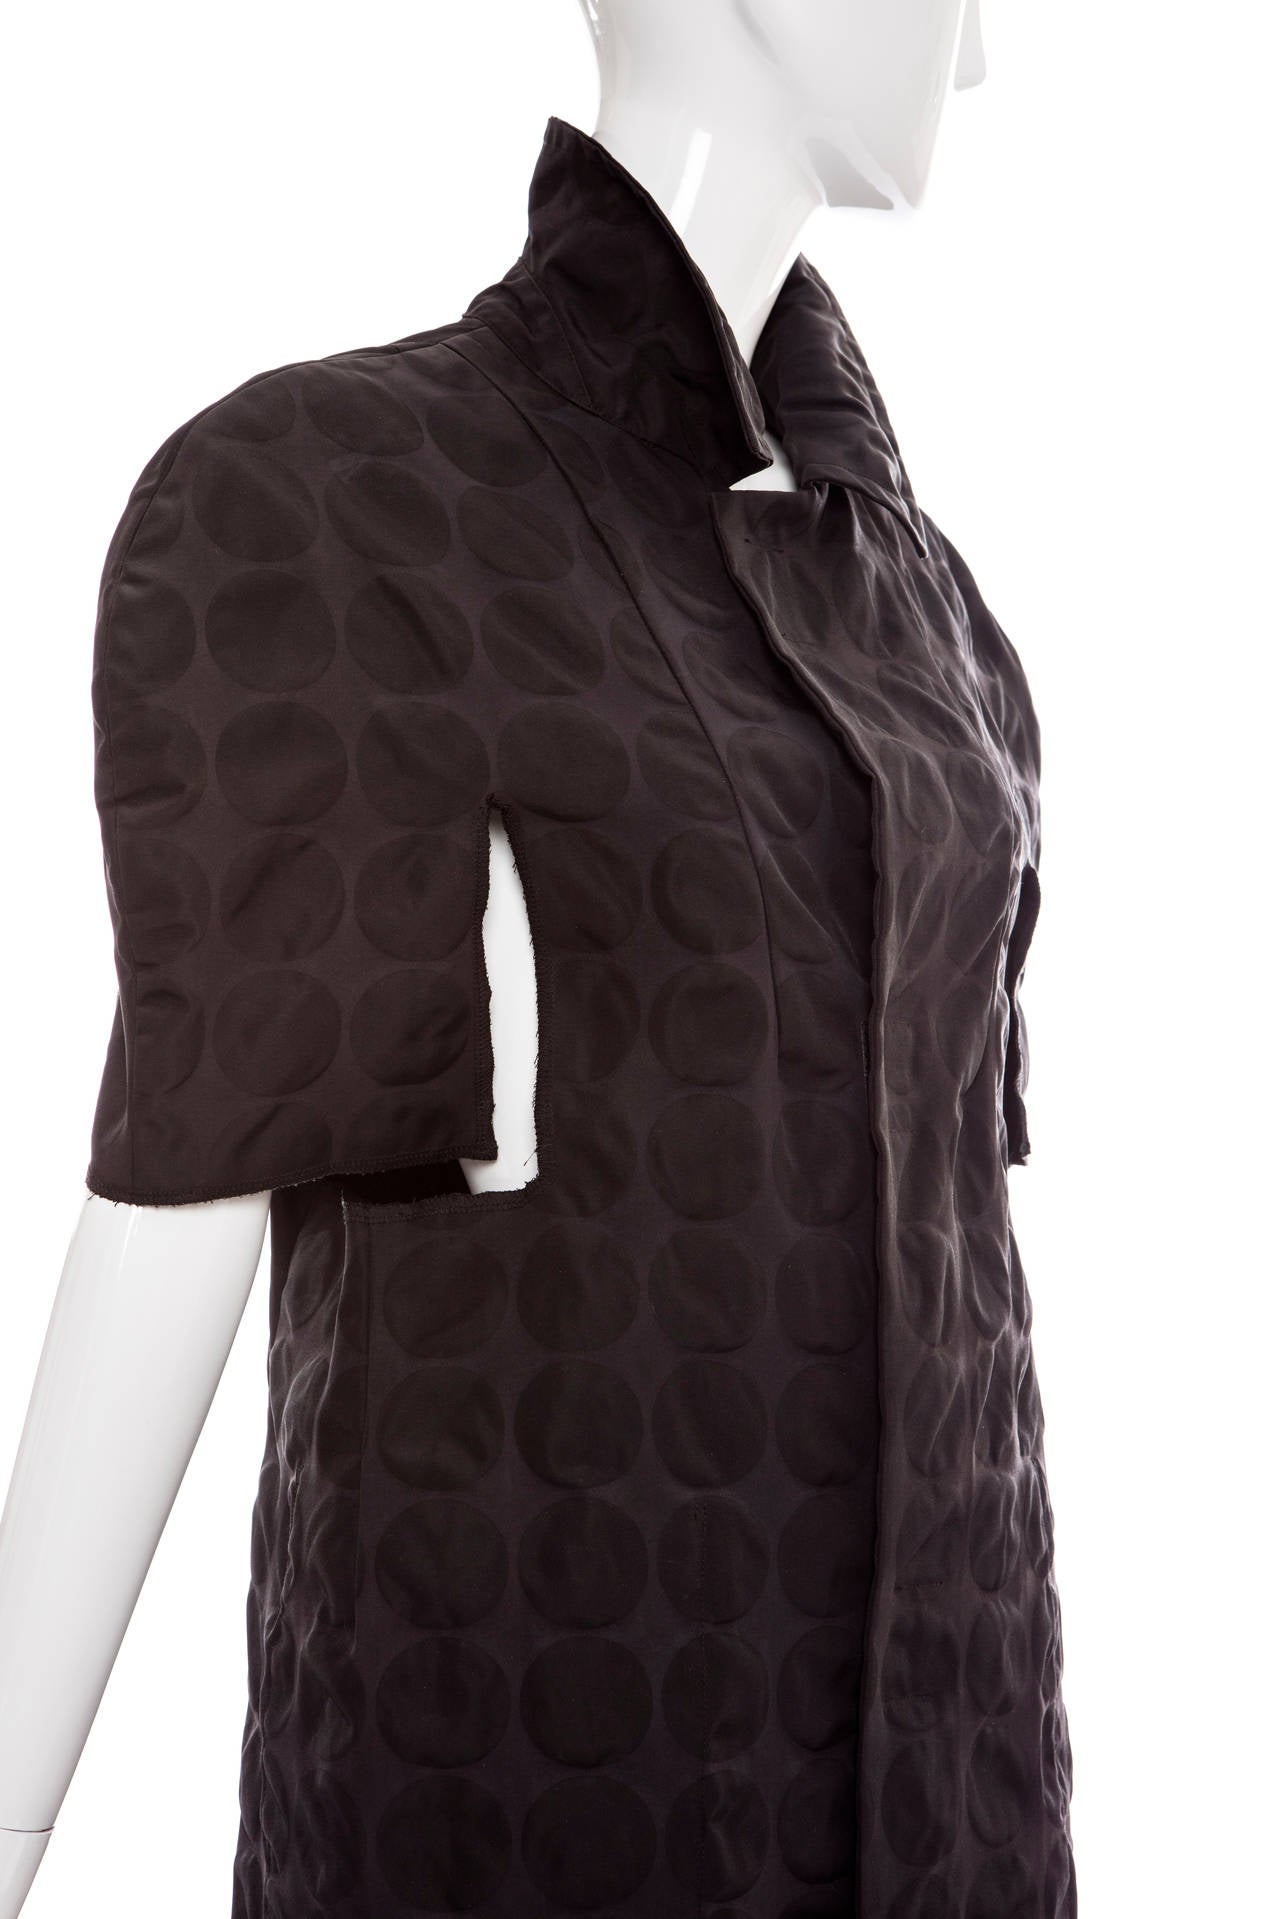 Comme des Garcons Black Abstract Circle Pattern Coat, Spring 2008 For Sale 3